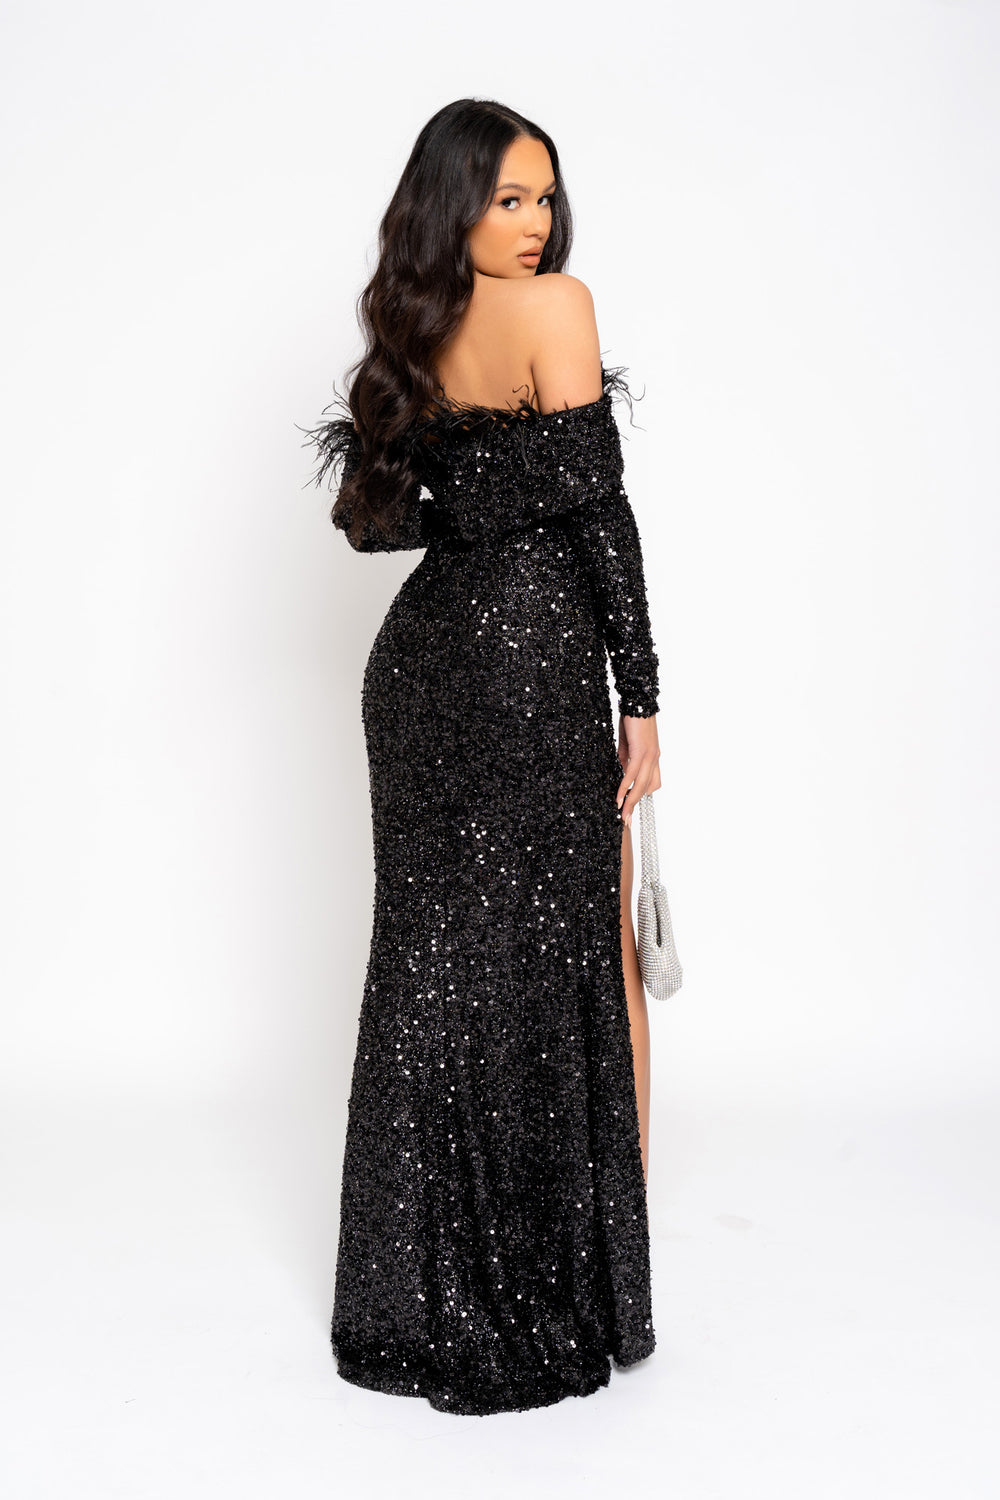 Eternity Black VIP Luxe Feather Off The Shoulder Sequin Long Sleeve Split Maxi Dress